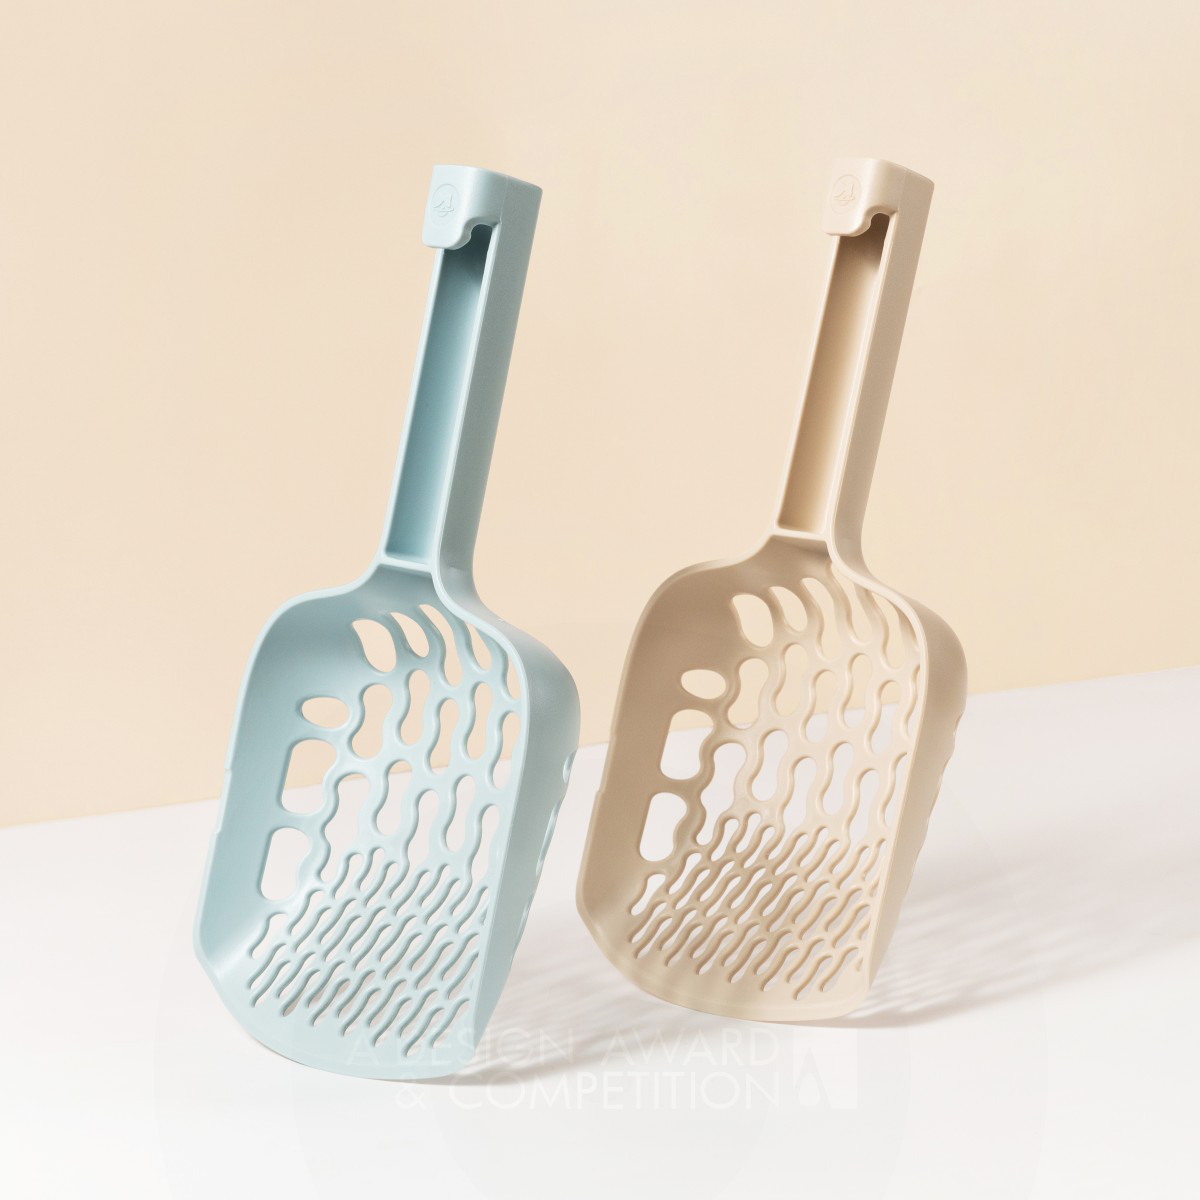 Planddo Co., Ltd. wins Iron at the prestigious A' Pet Care, Toys, Supplies and Products for Animals Design Award with Infinity Cat Litter Scoop.